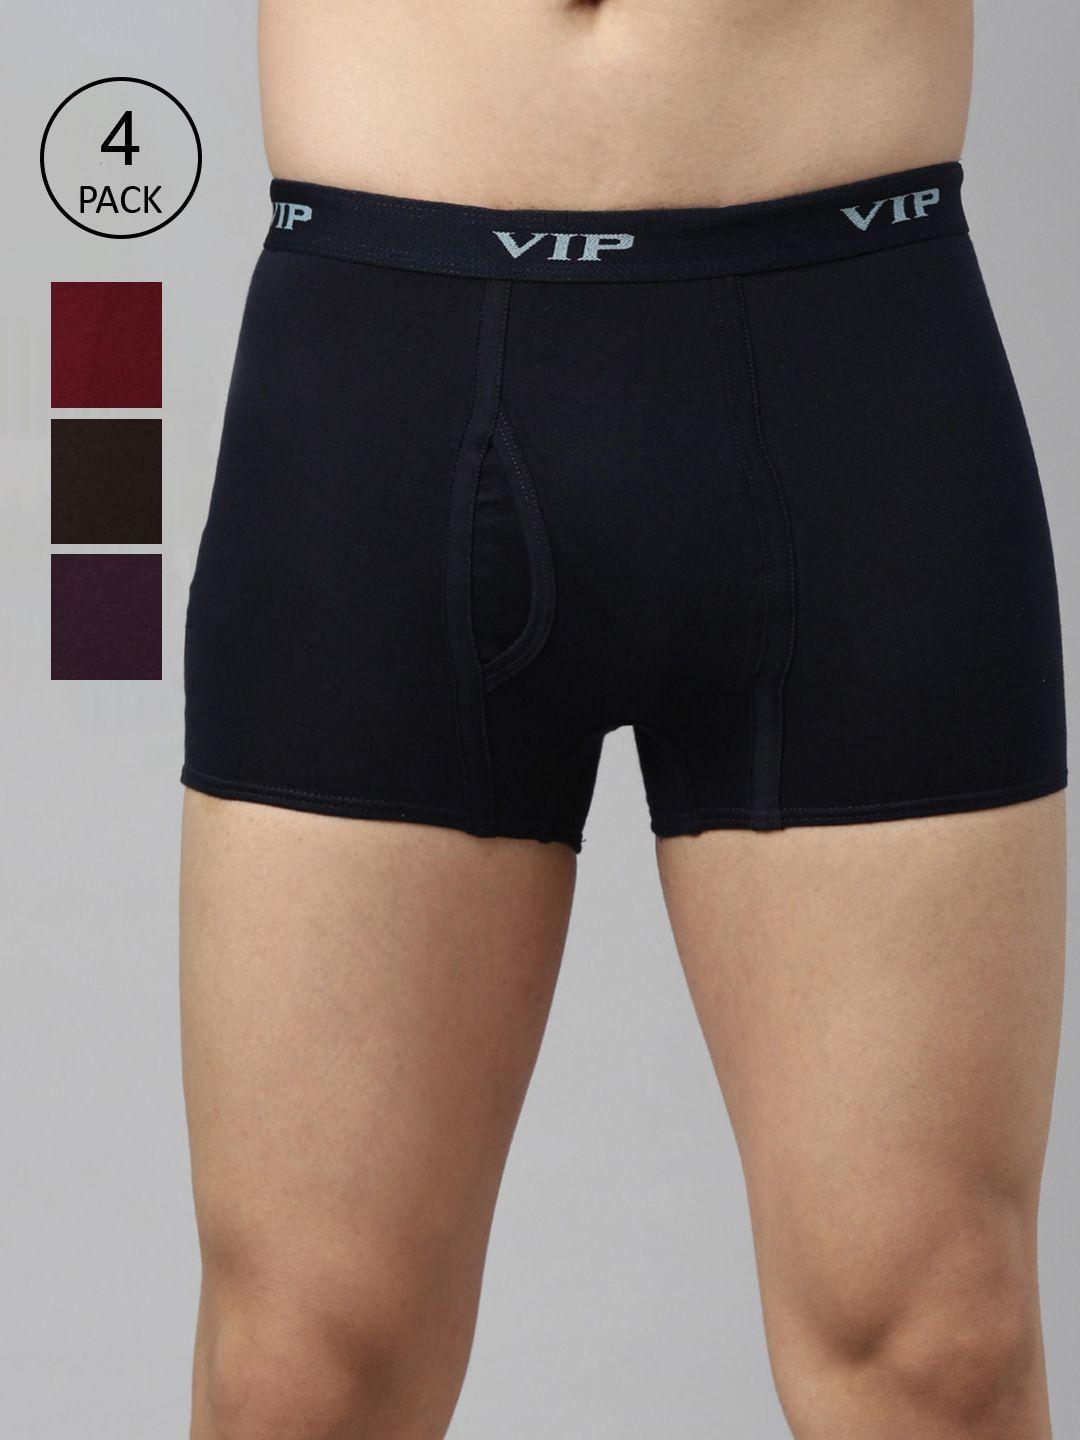 vip pack-4 men assorted pure cotton trunks punchpo4_80